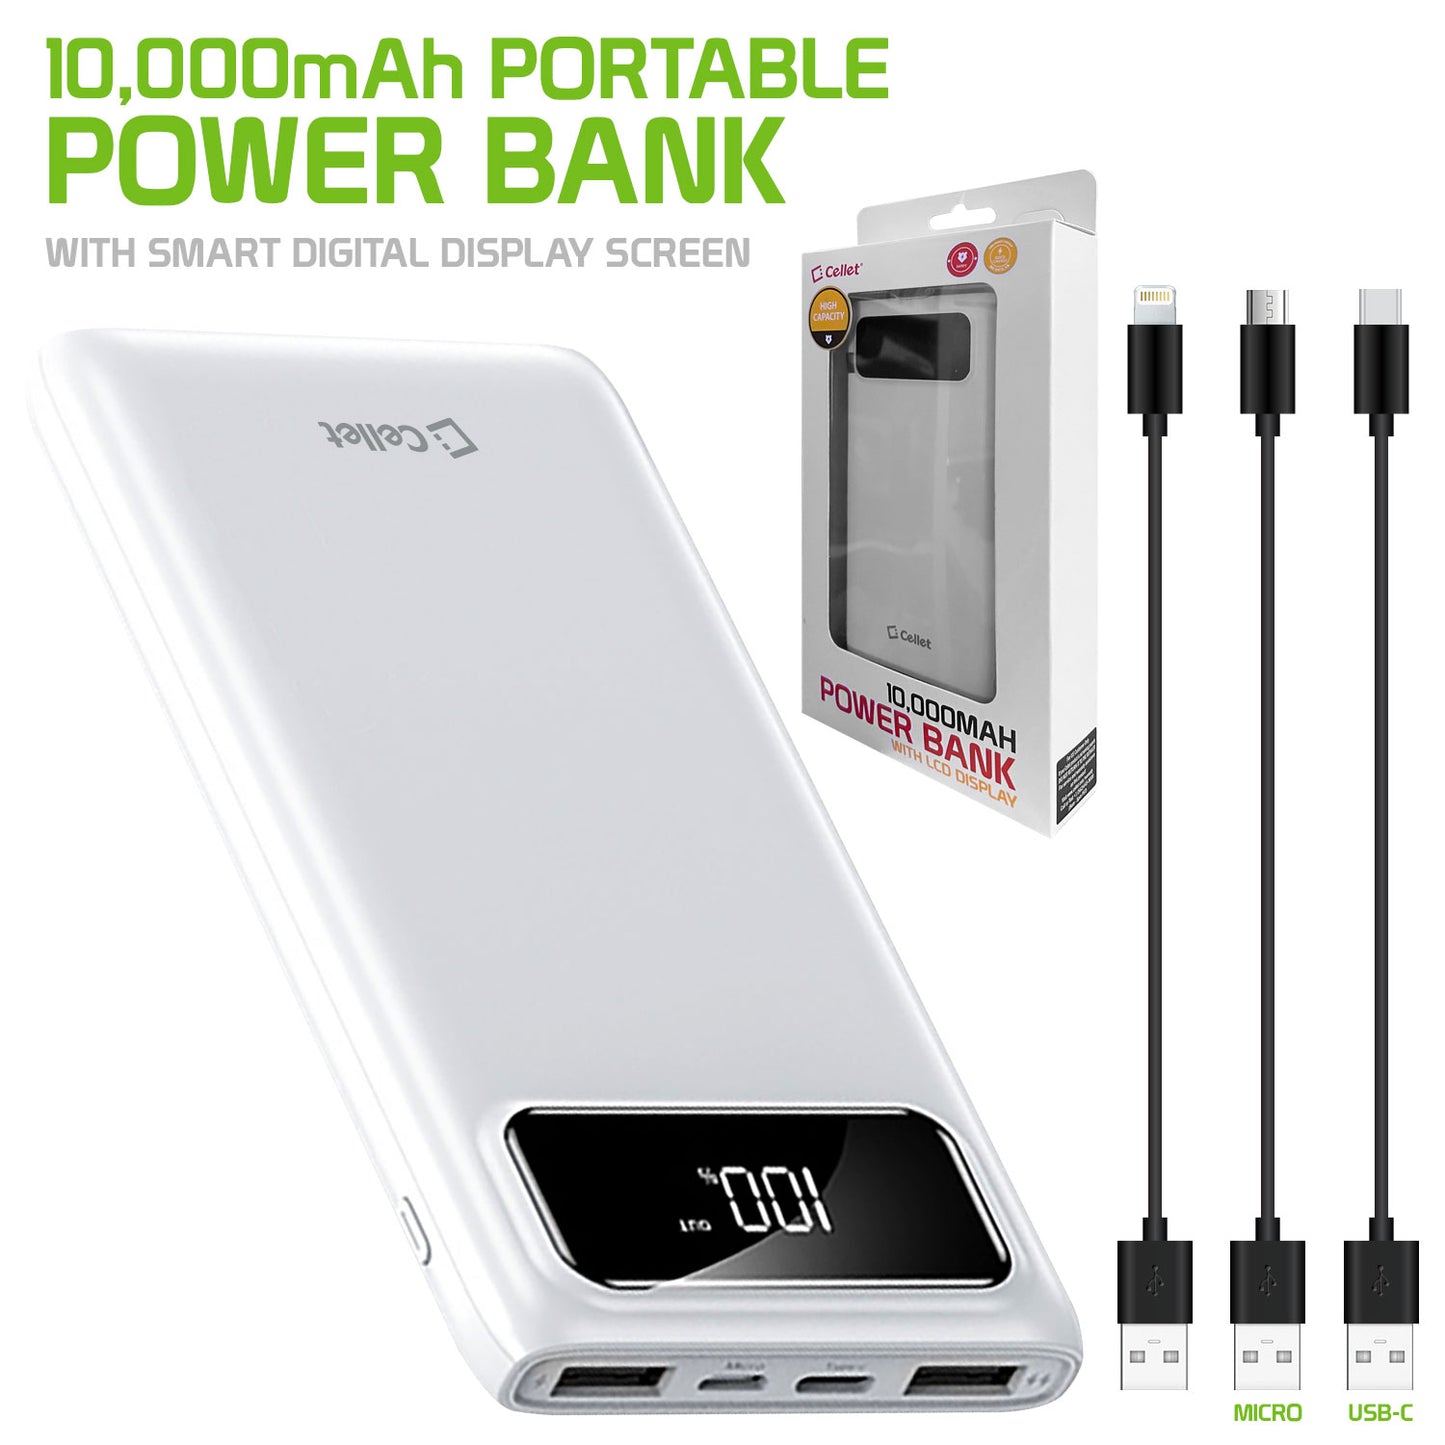 10,000mAh Portable Power Bank with Smart Digital Display Screen Compatible with iPhones Samsung Galaxy, Note, Motorola Moto, Google Pixel - White